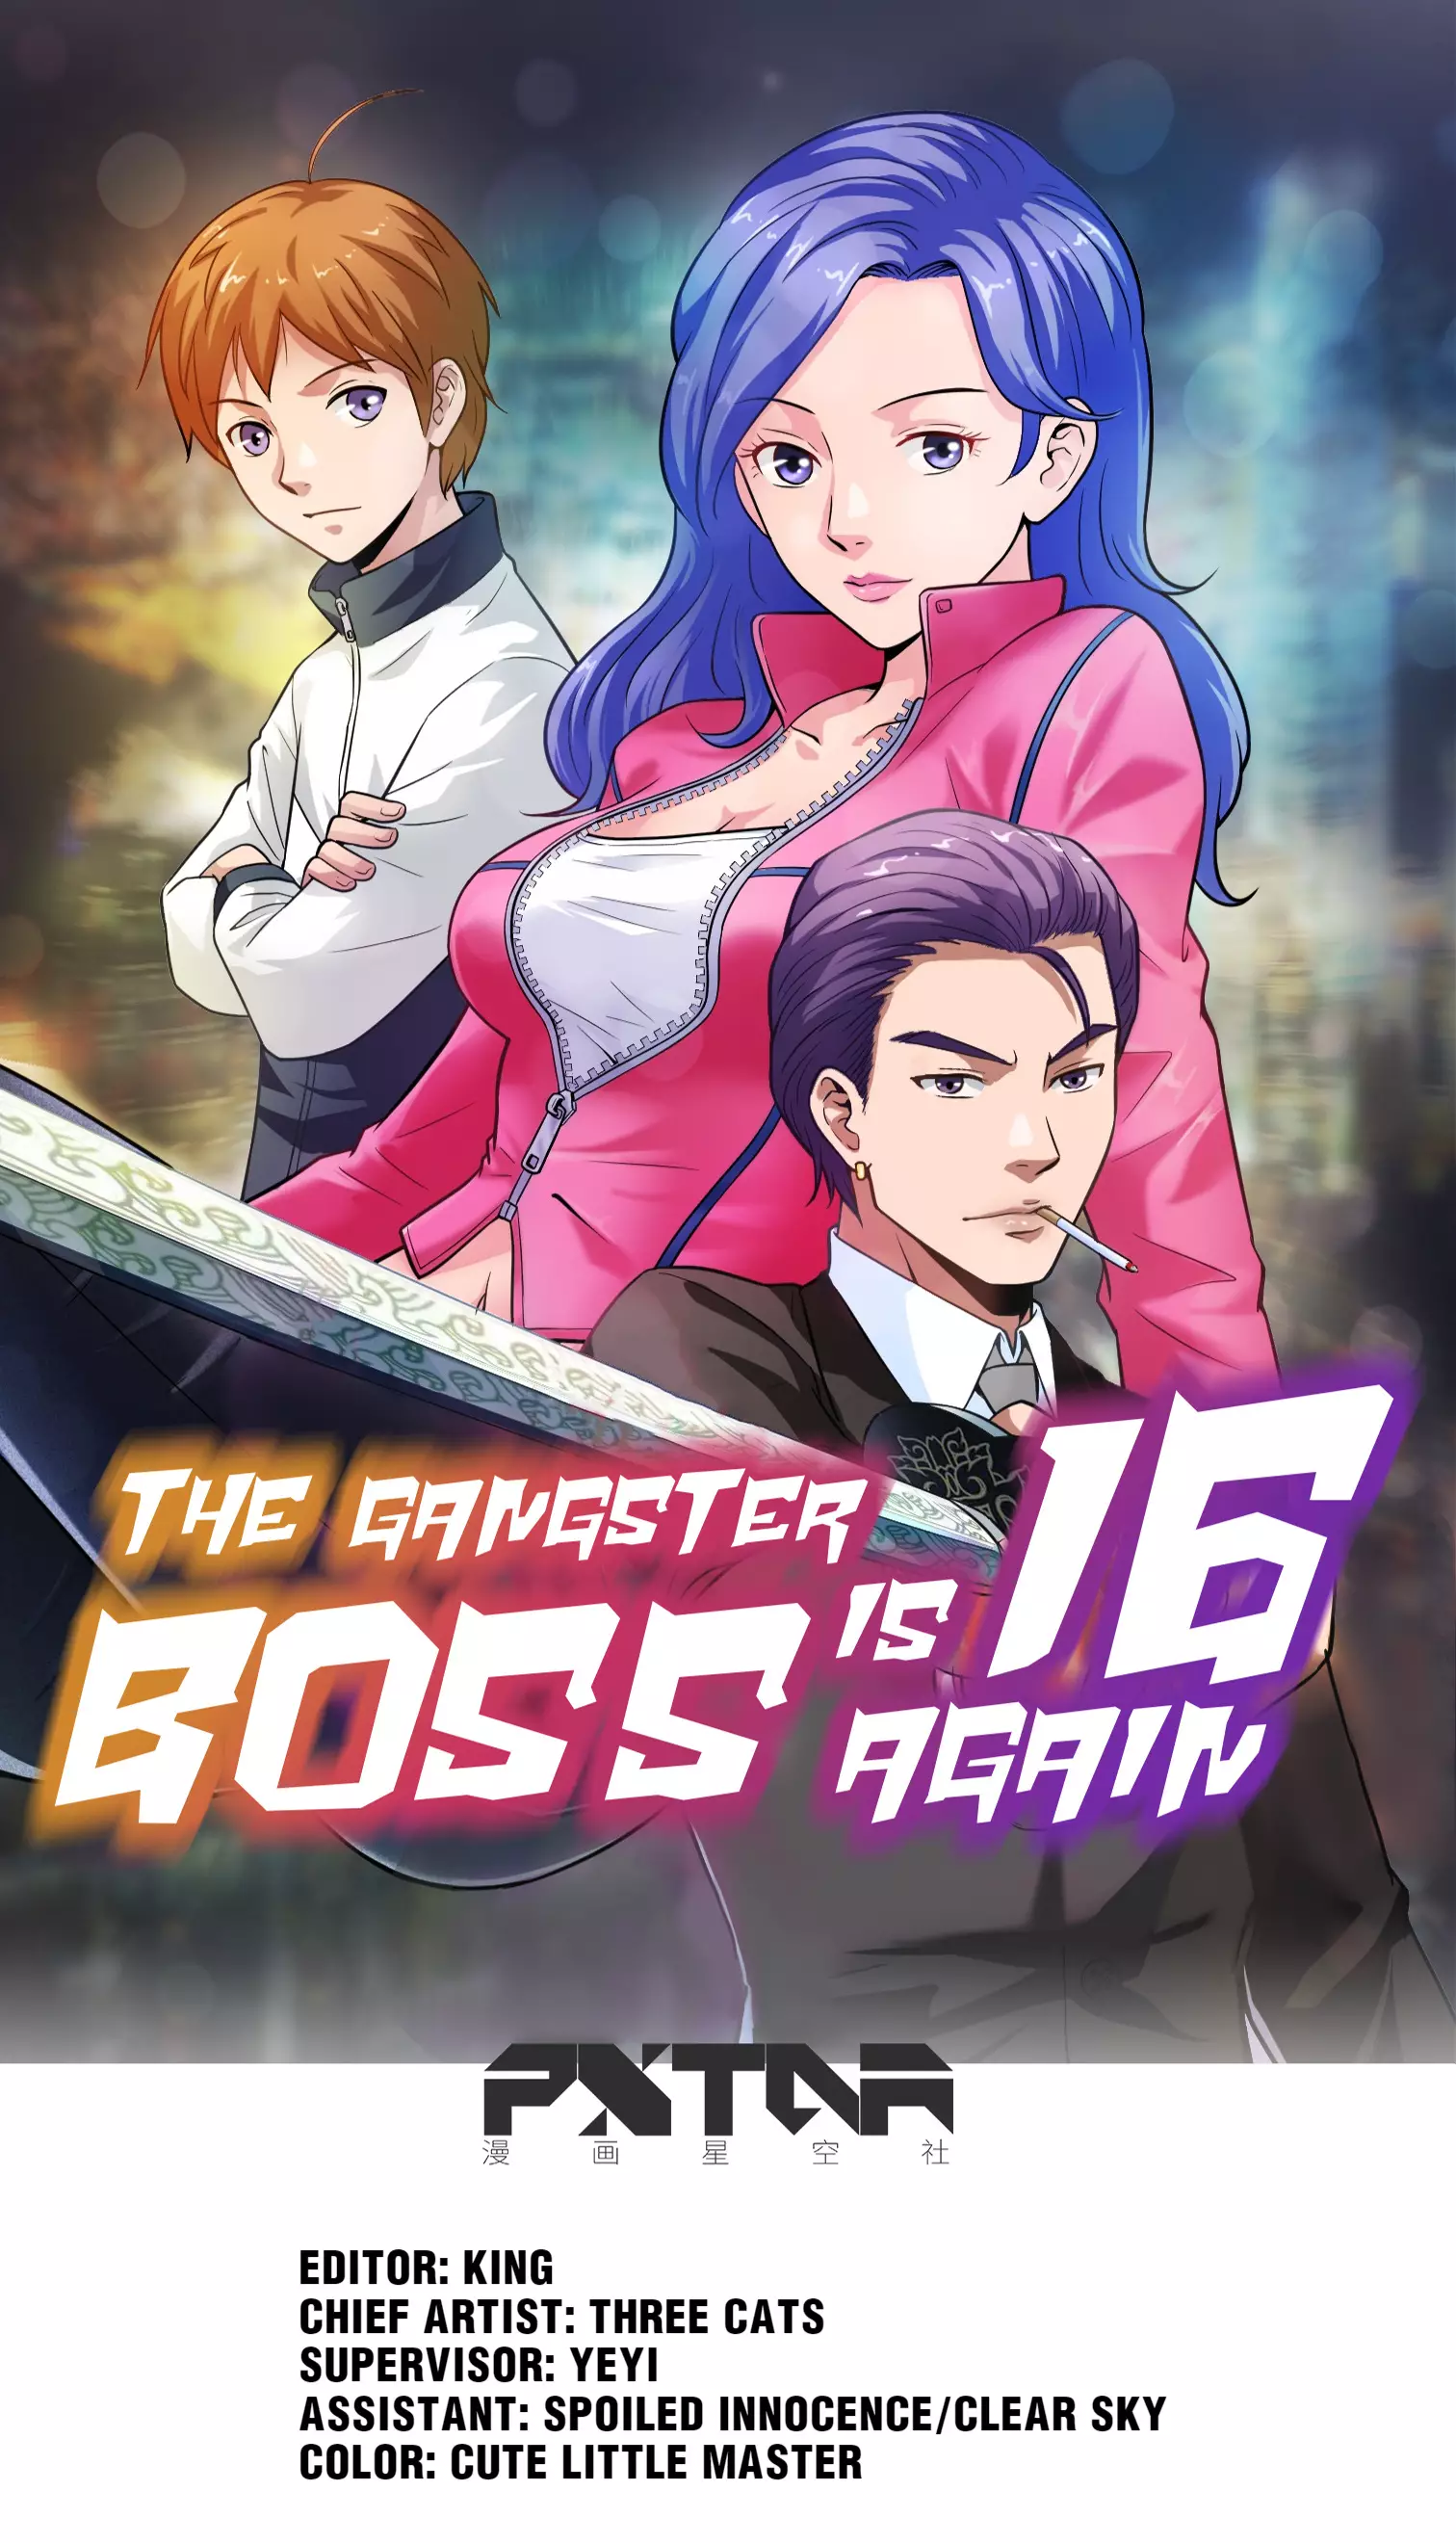 The Gangster Boss Is 16 Again - 50.1 page 1-f14f9f4a